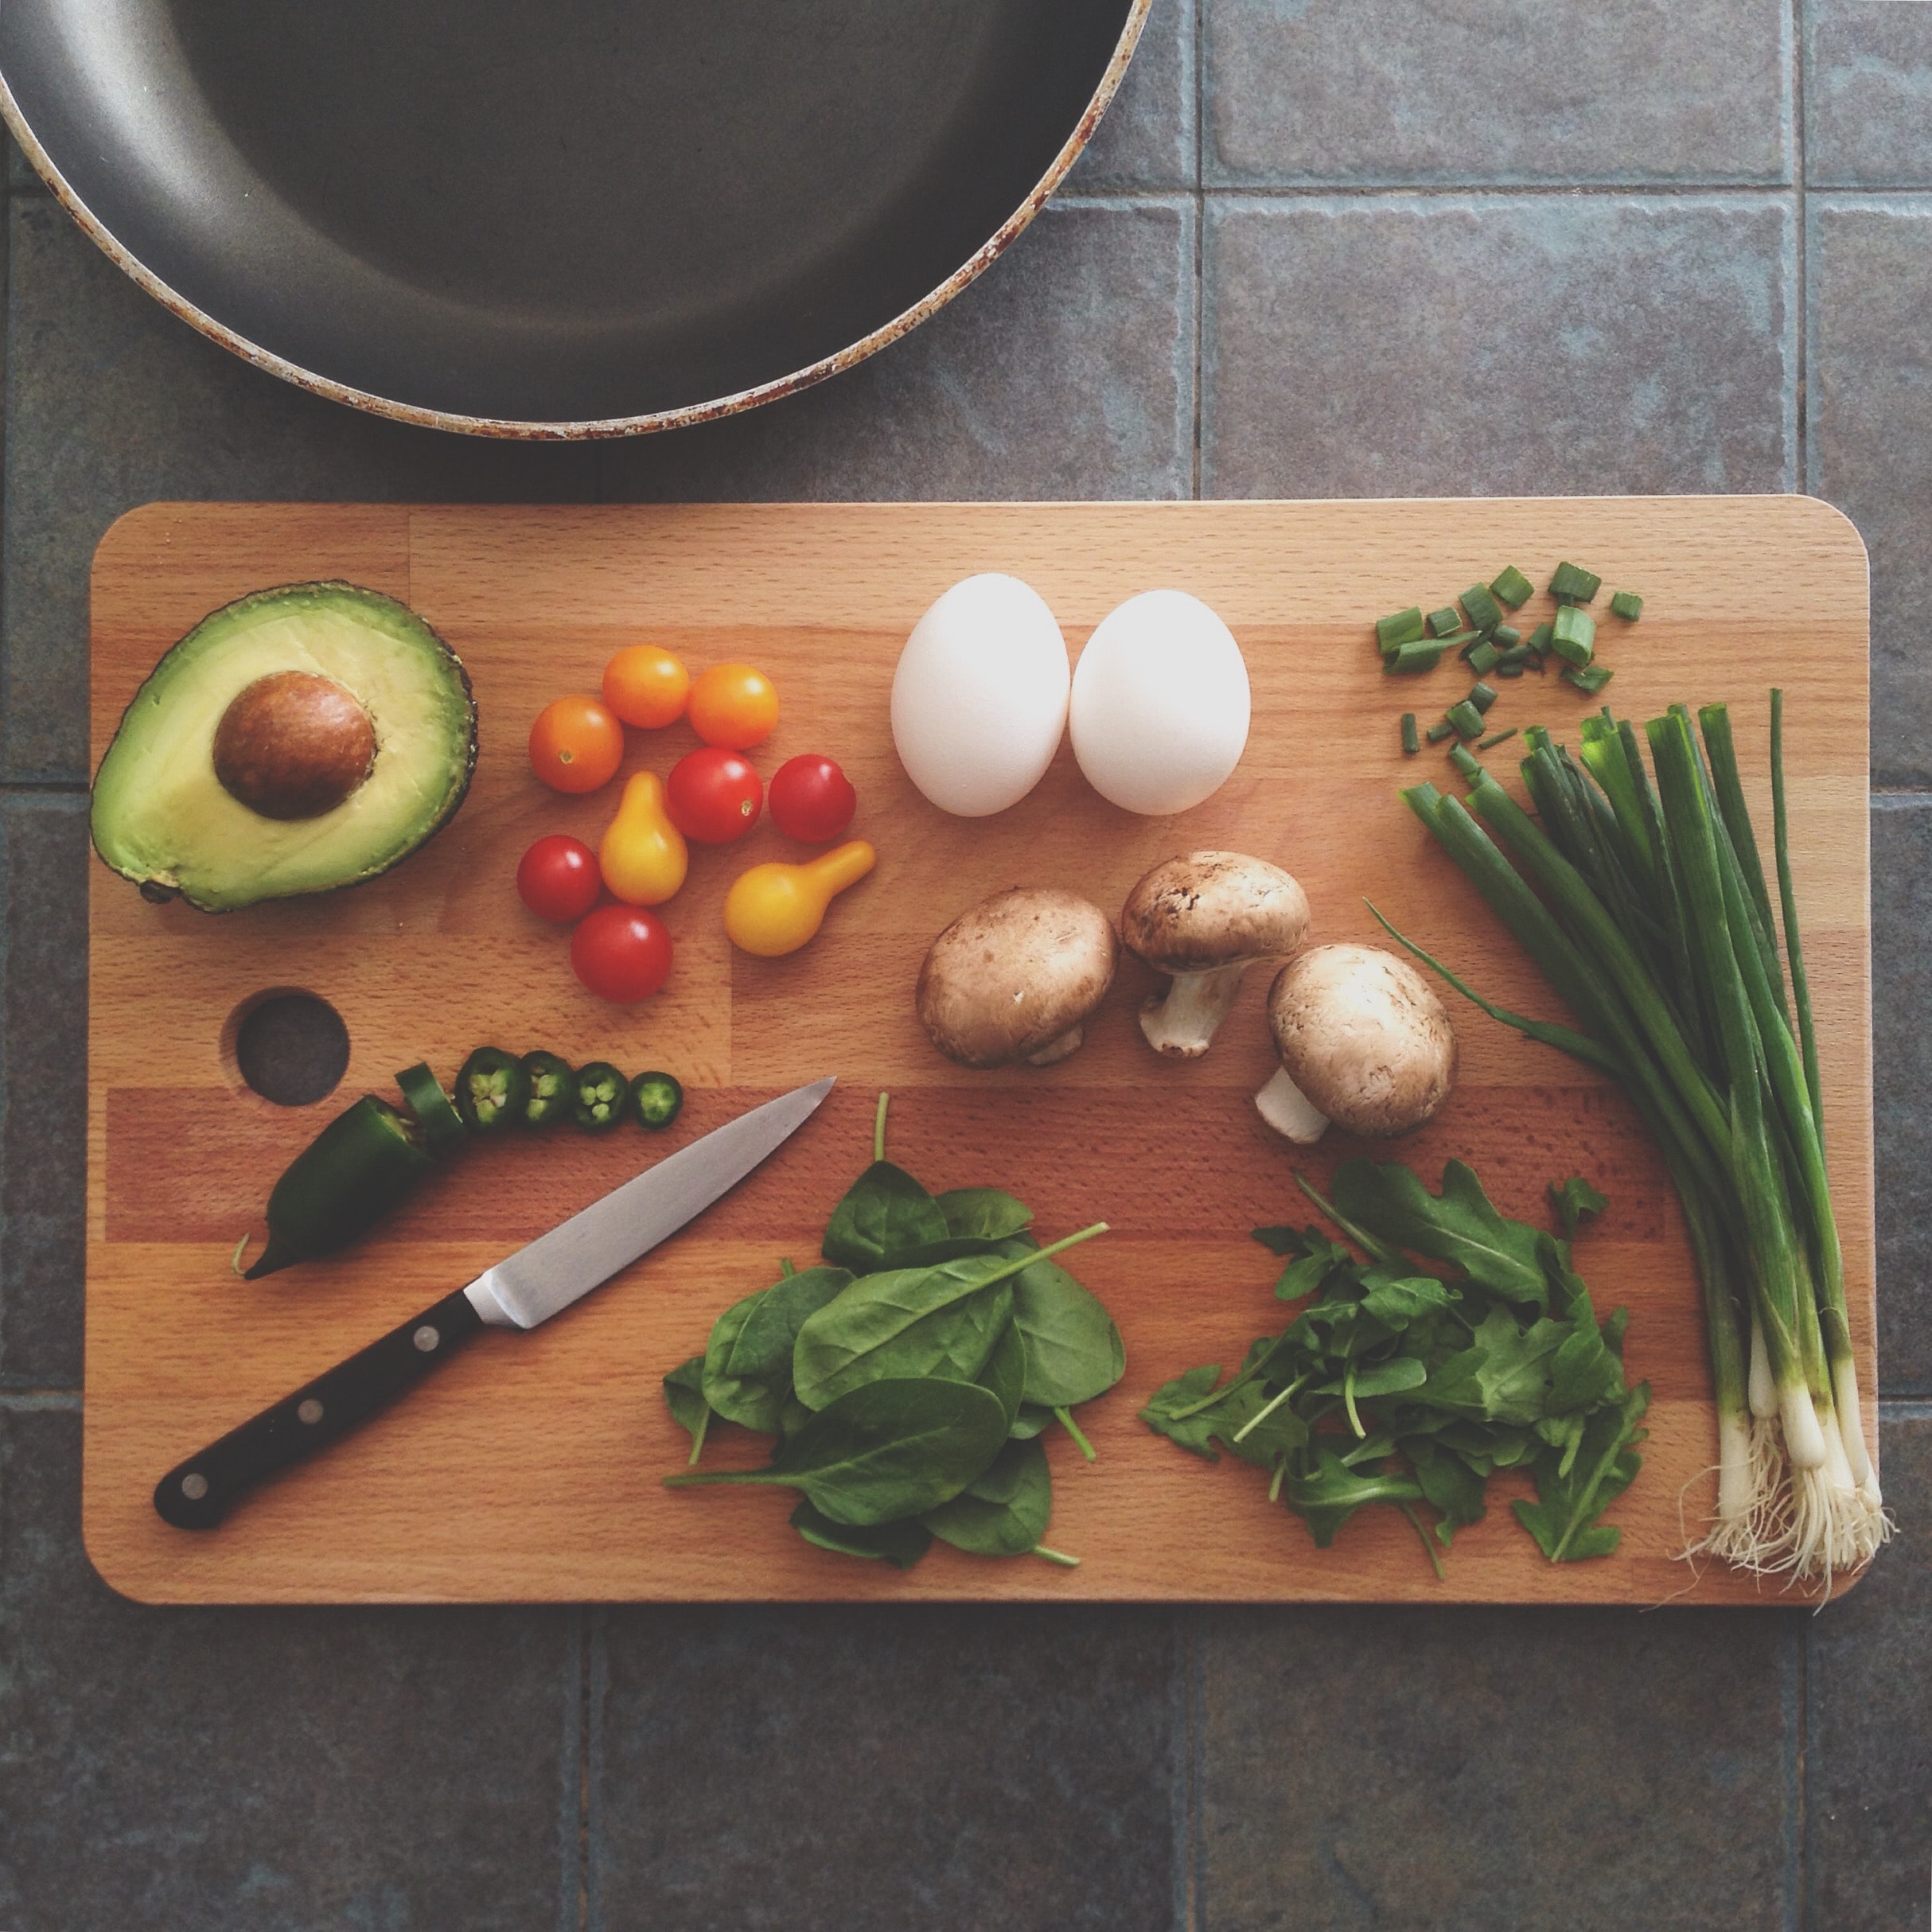 5 Ways Cooking Can Improve Your Day